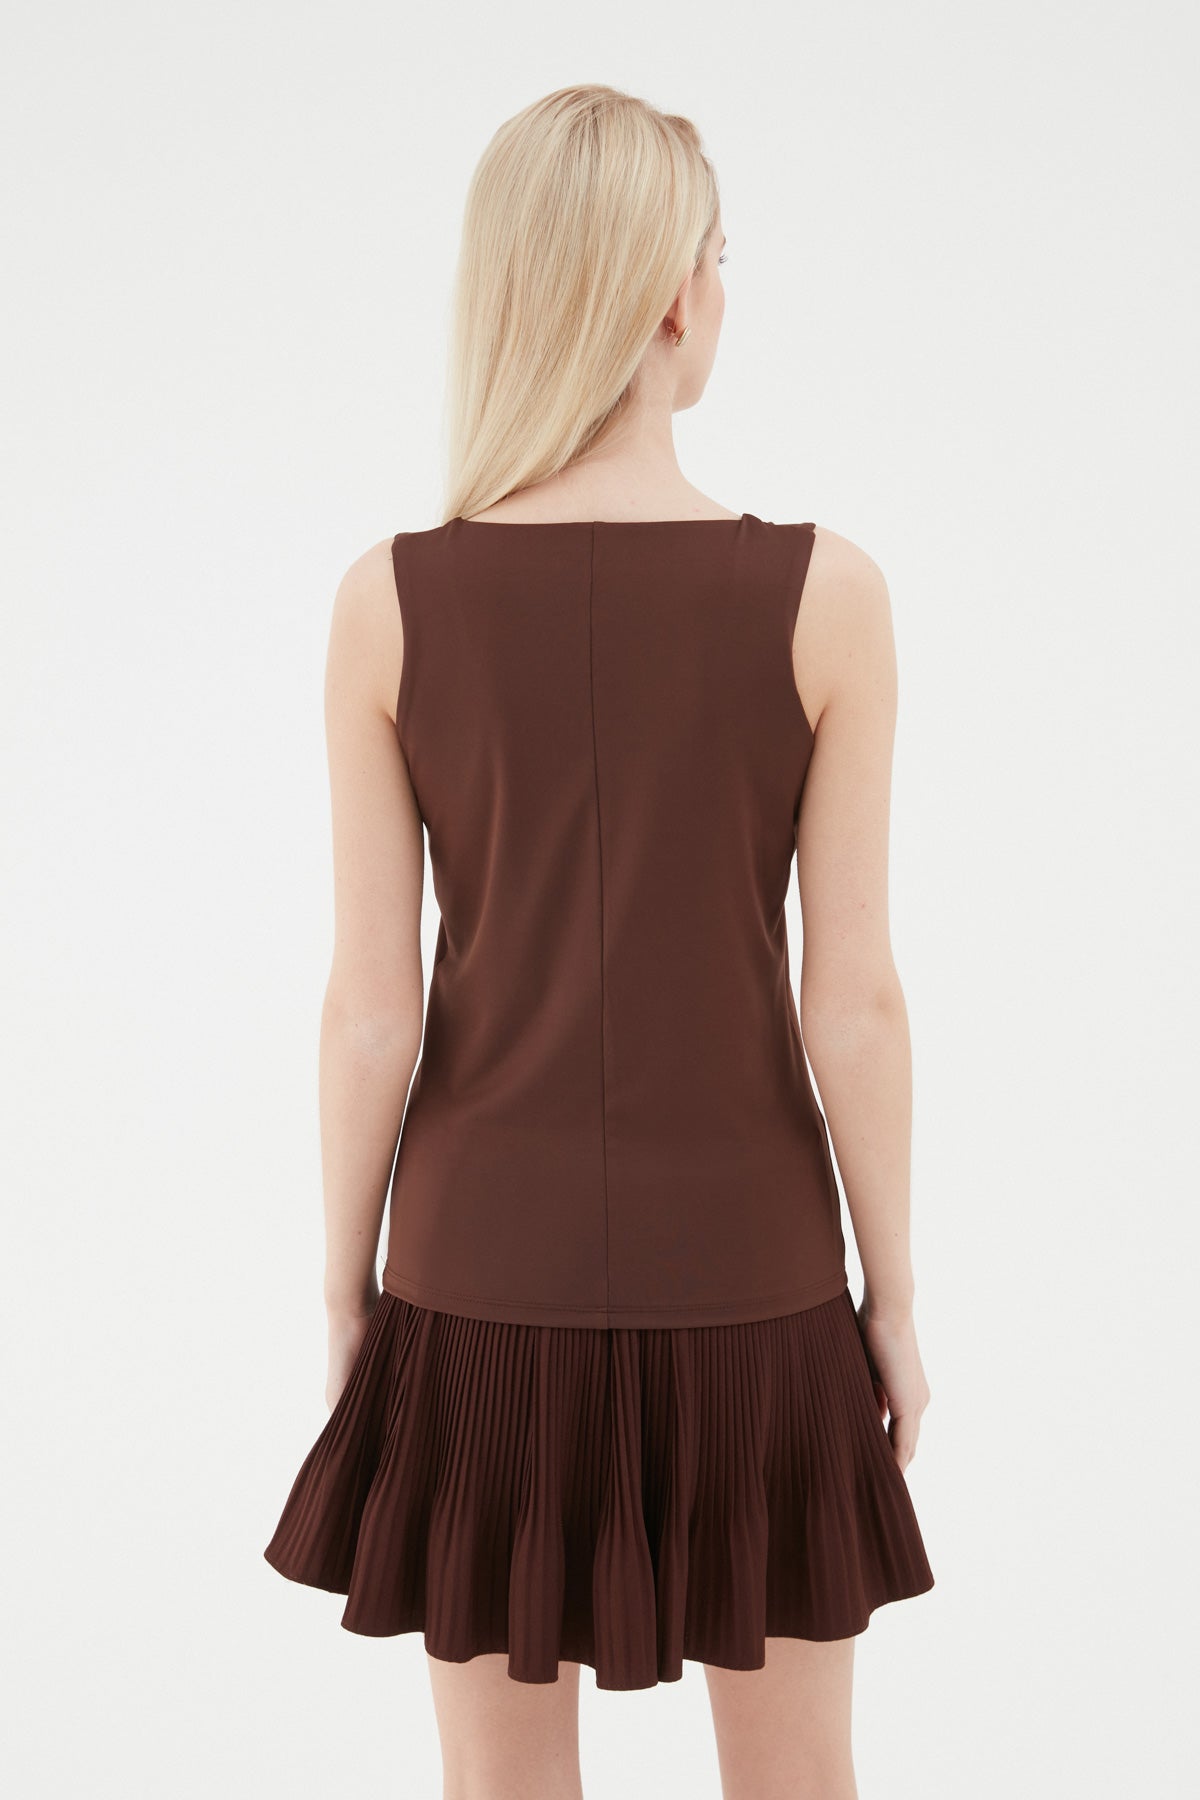 Thick Strap Basic Blouse Brown